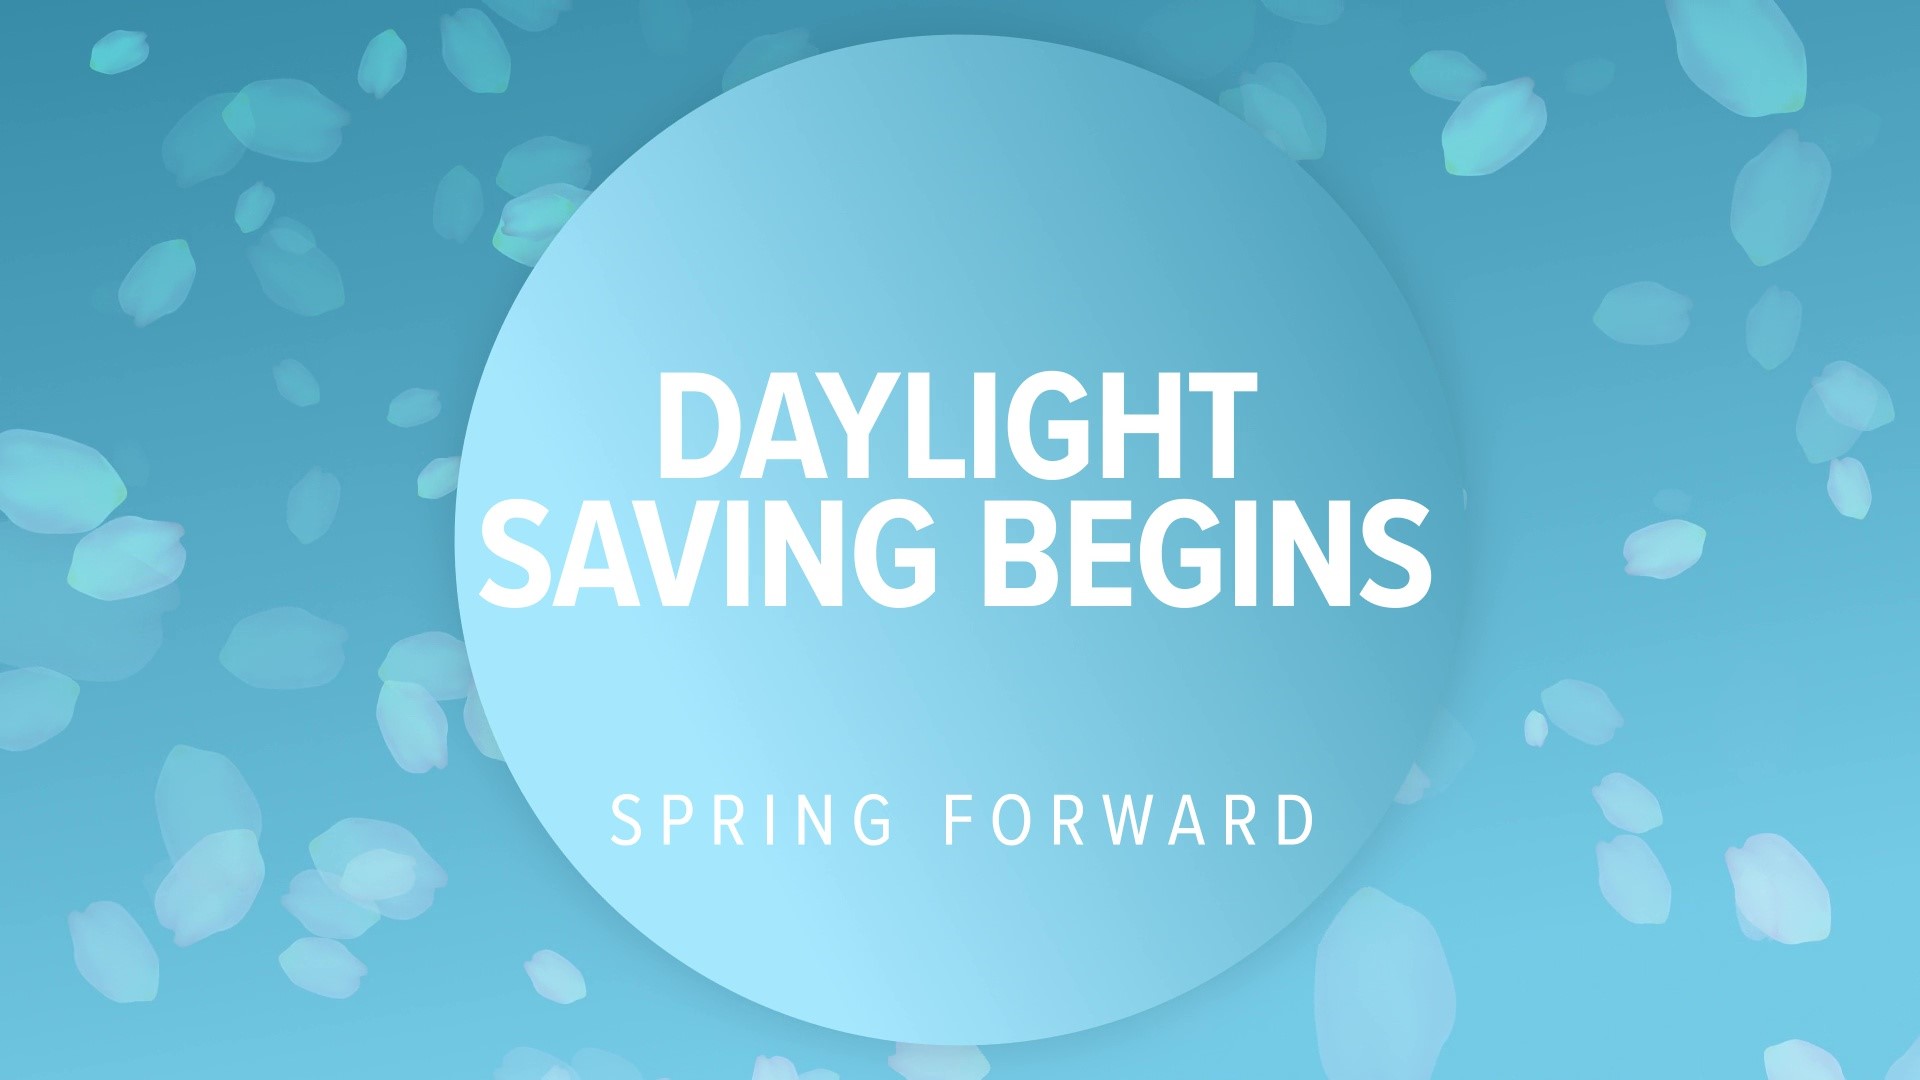 Geisinger experts explain what you can do to make daylight saving time easier on your body.